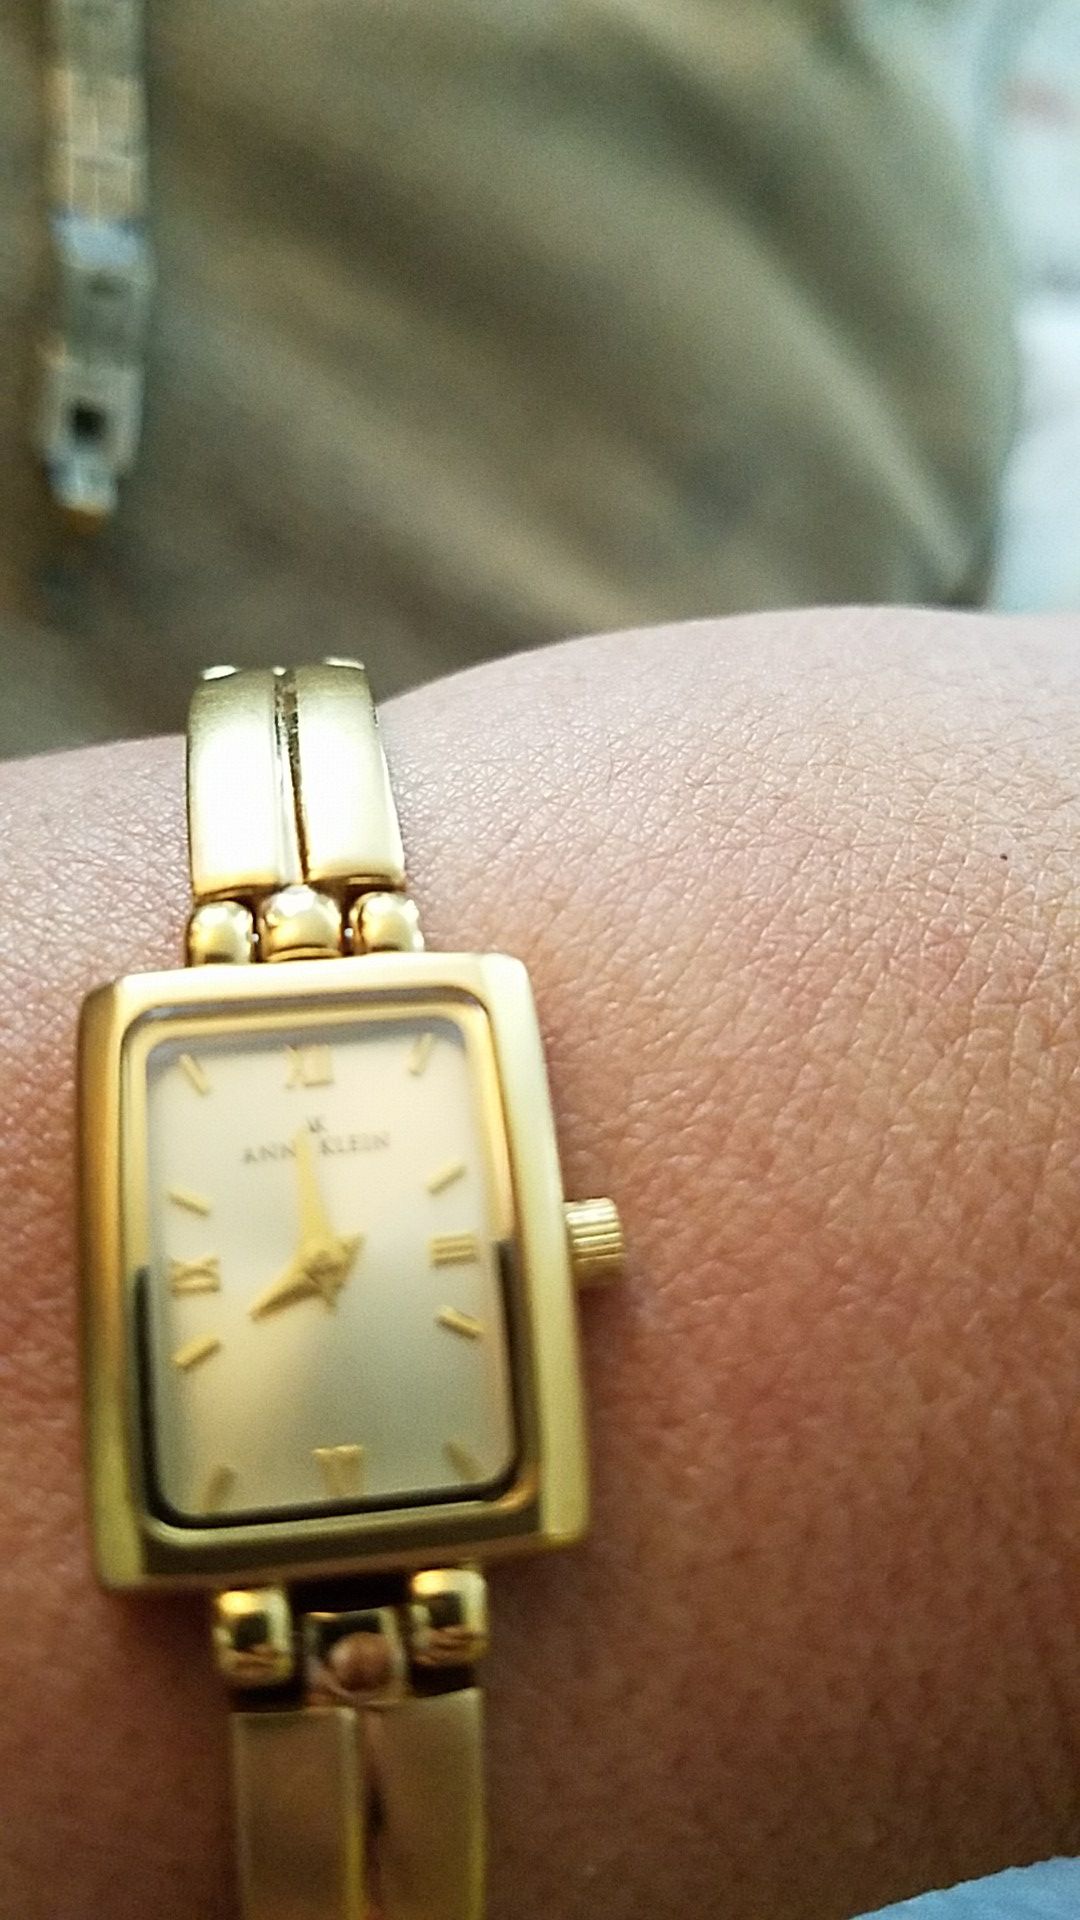 Anne Klein gold tone ladies watch replaced battery